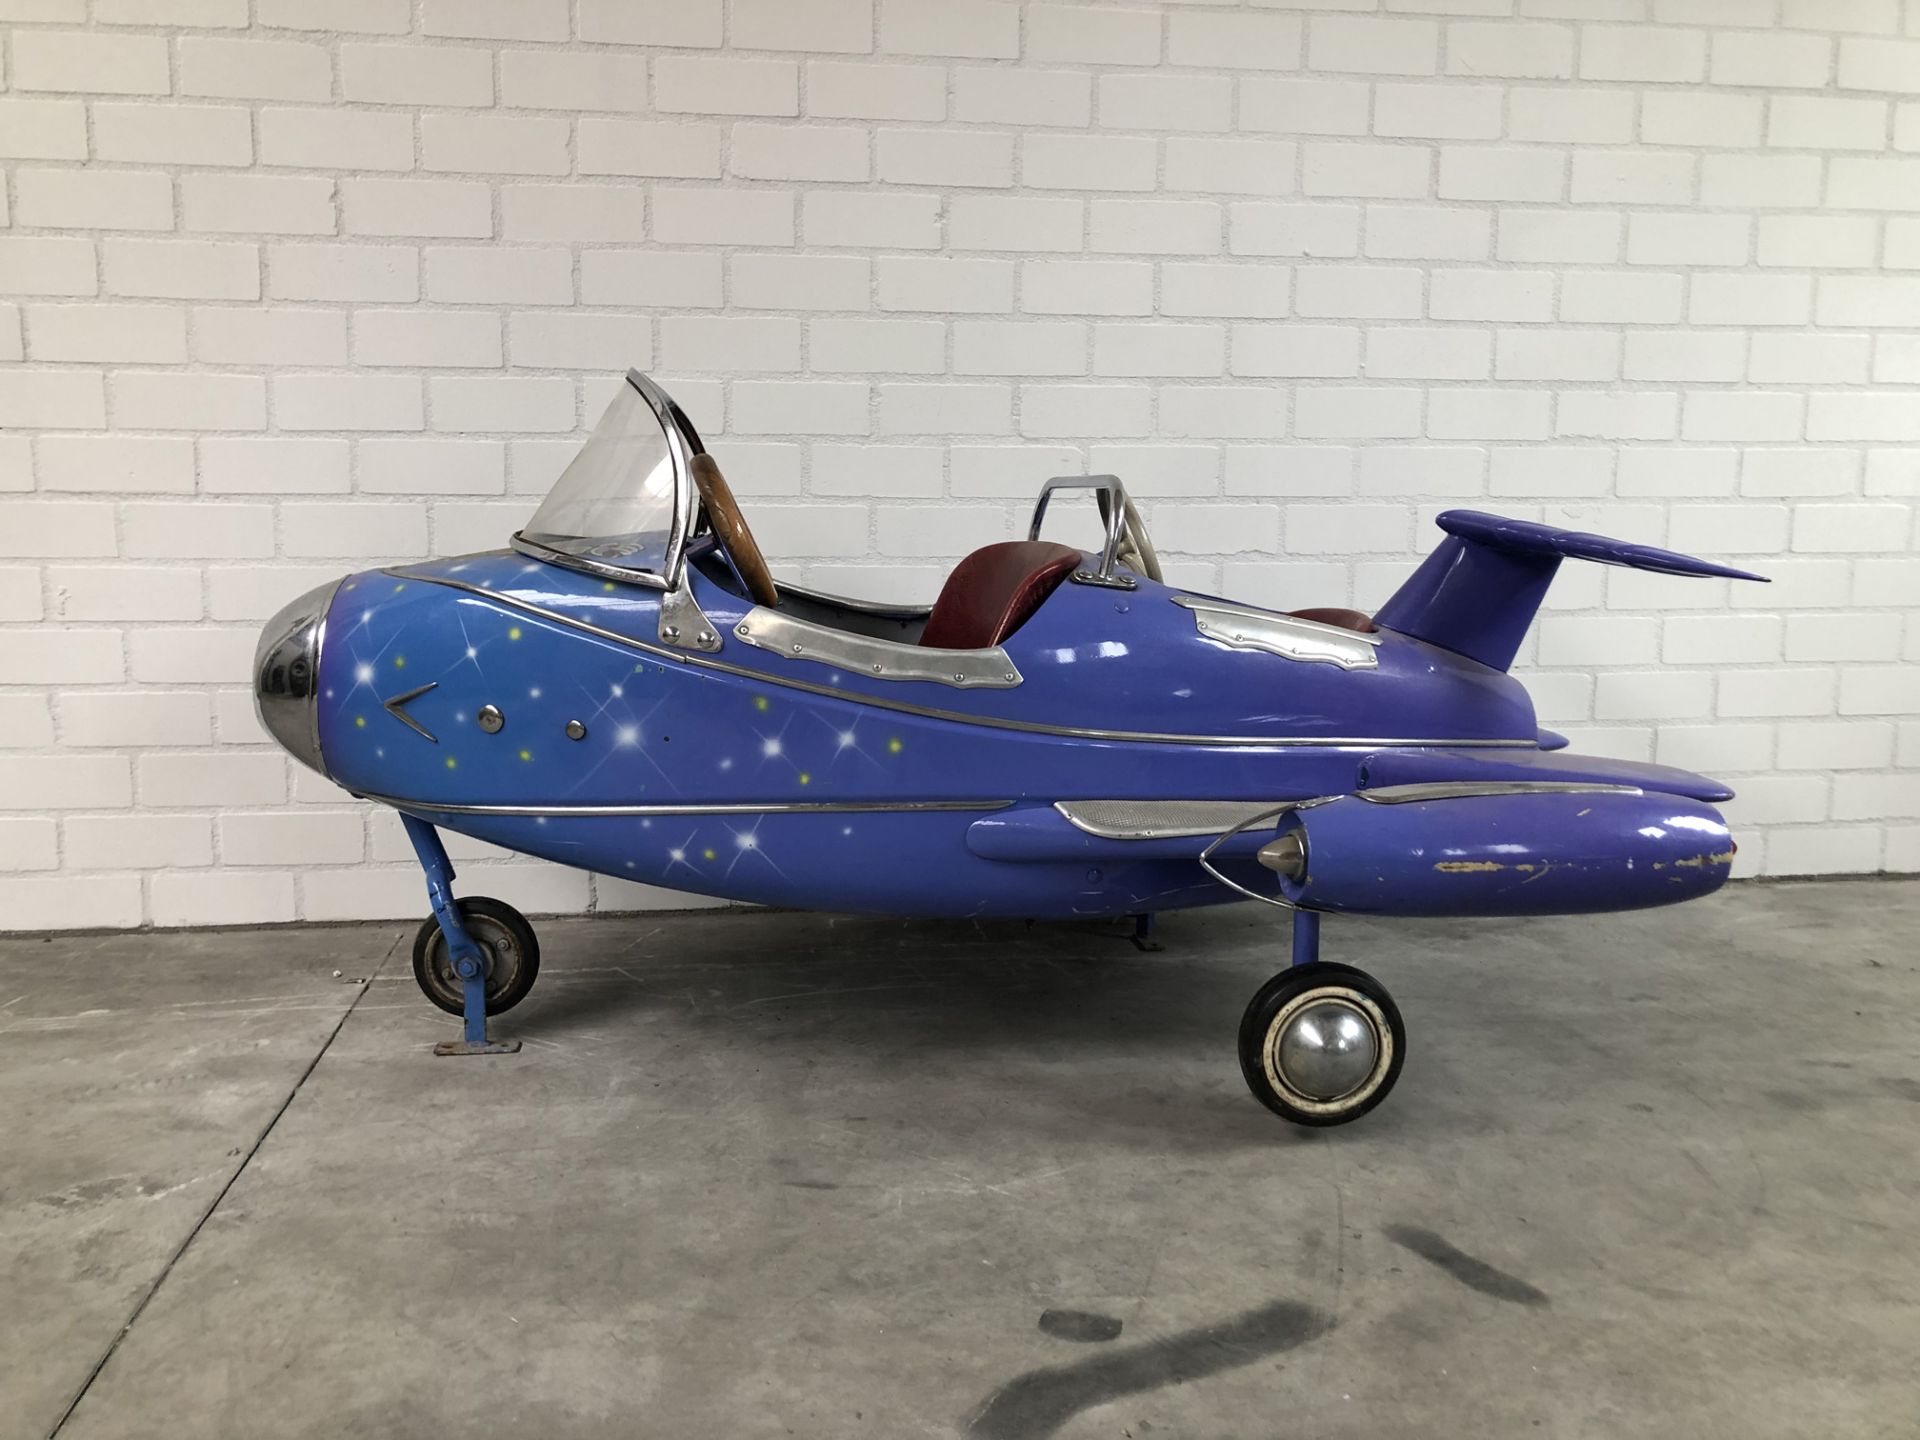 L'Autopede Carousel Jet Fighter - Image 10 of 15